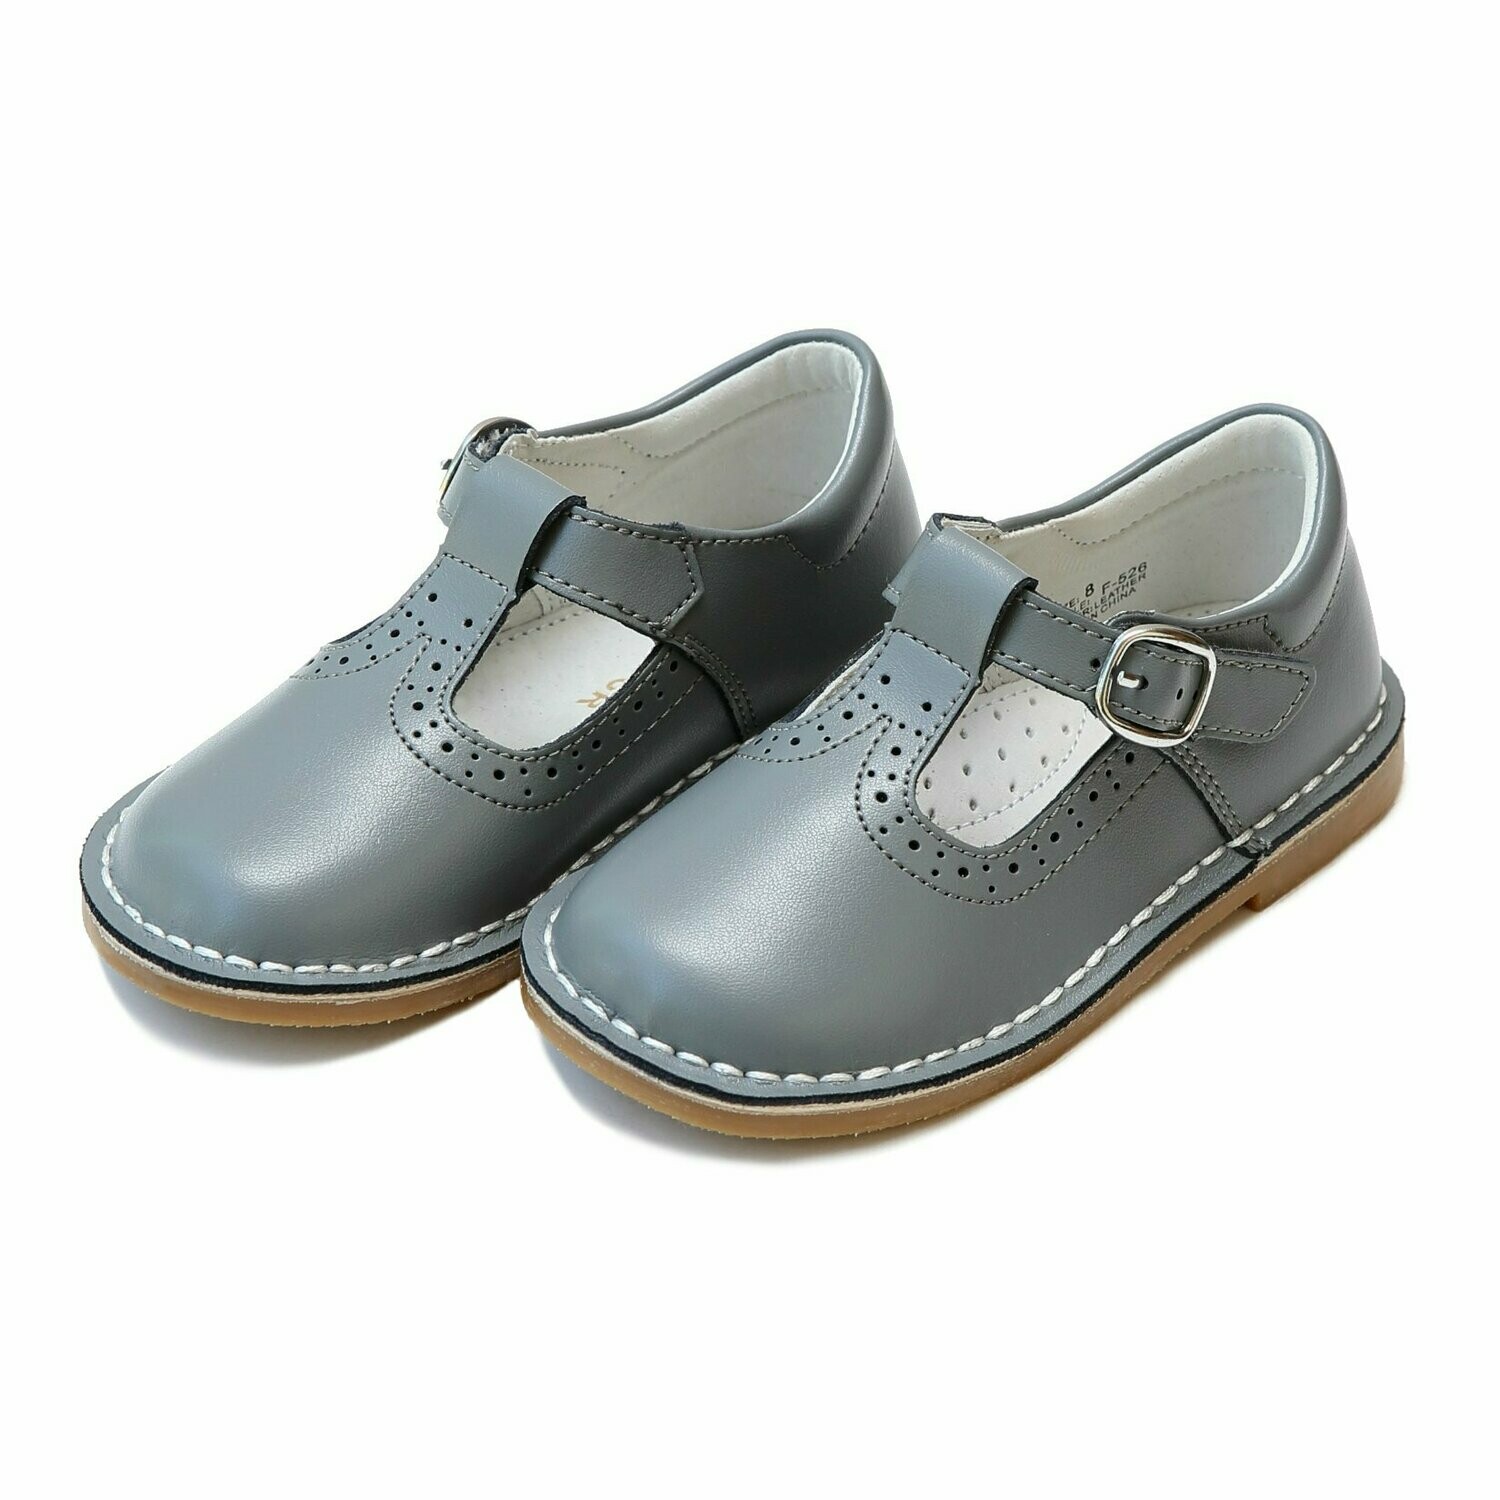 L'Amour Grey Mary Janes